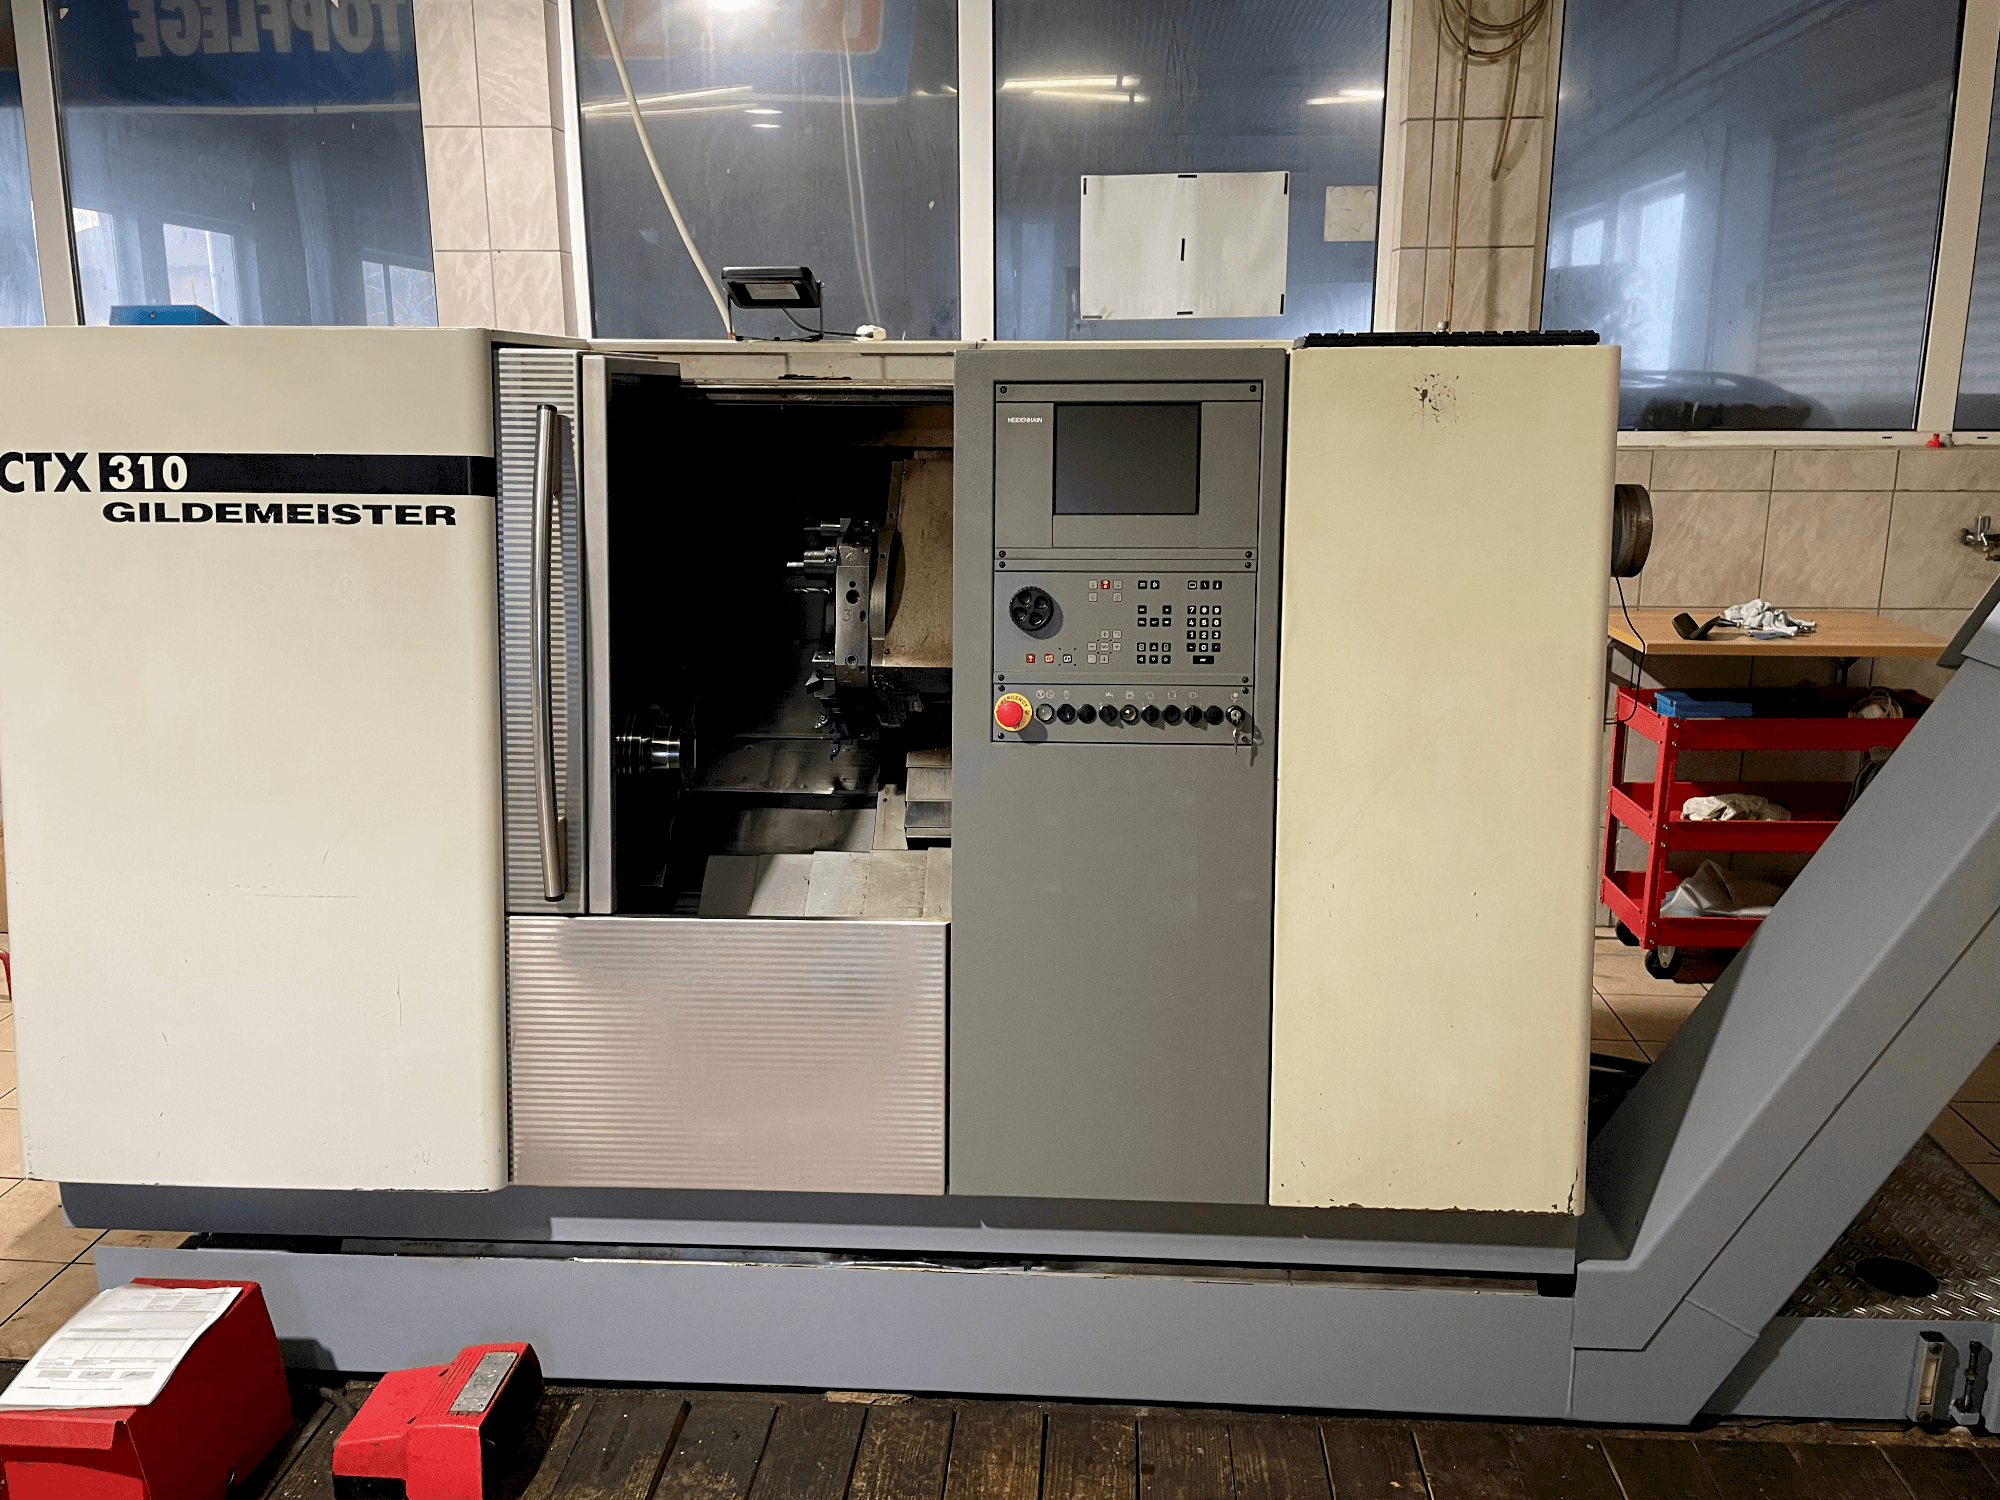 Front view of Gildemeister CTX 310 V3  machine